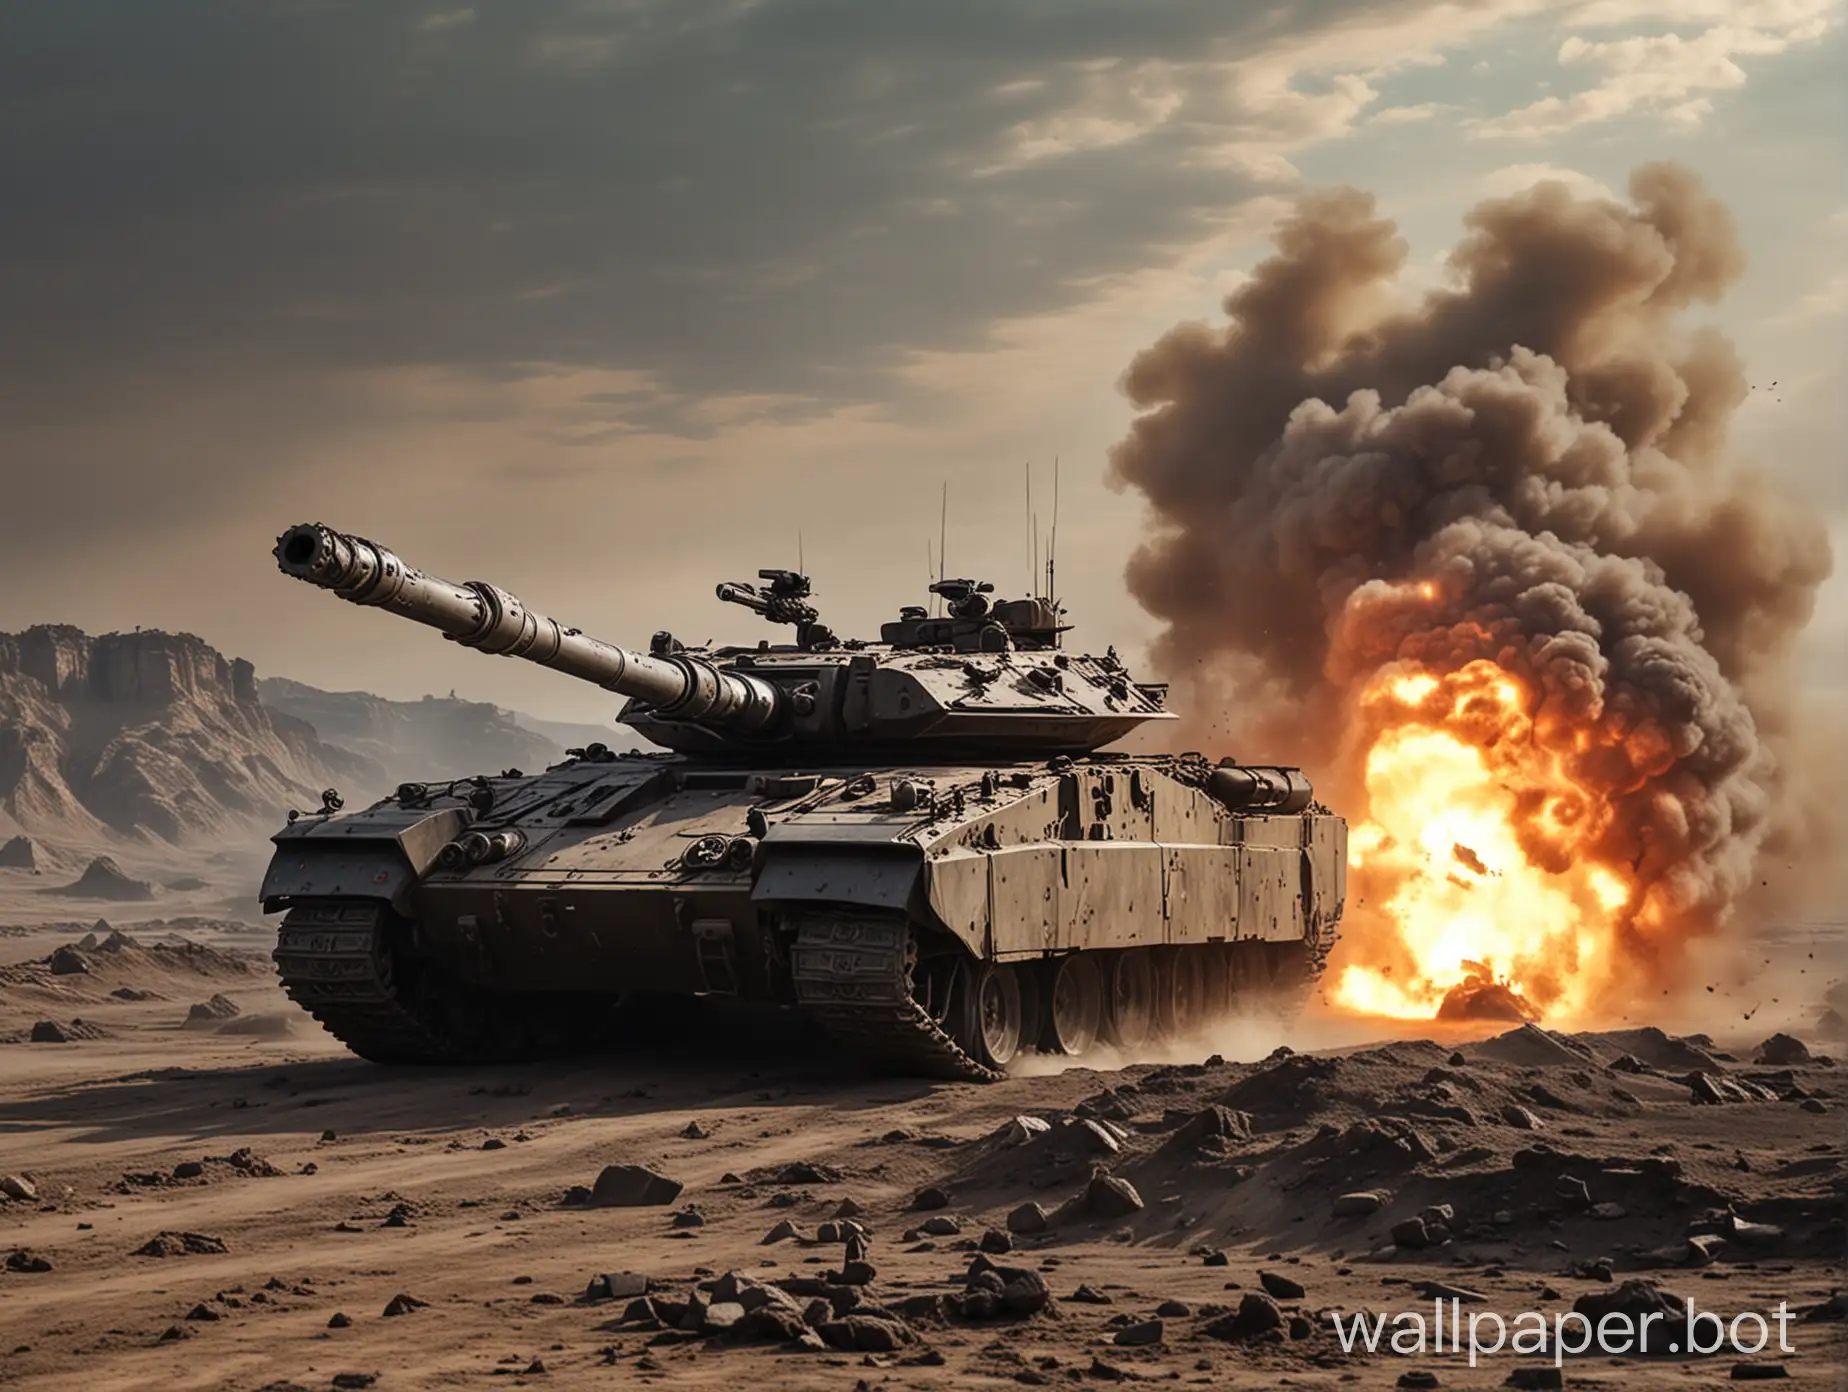 T90-Tank-Maneuvering-and-Firing-on-a-Alien-Scorched-Landscape